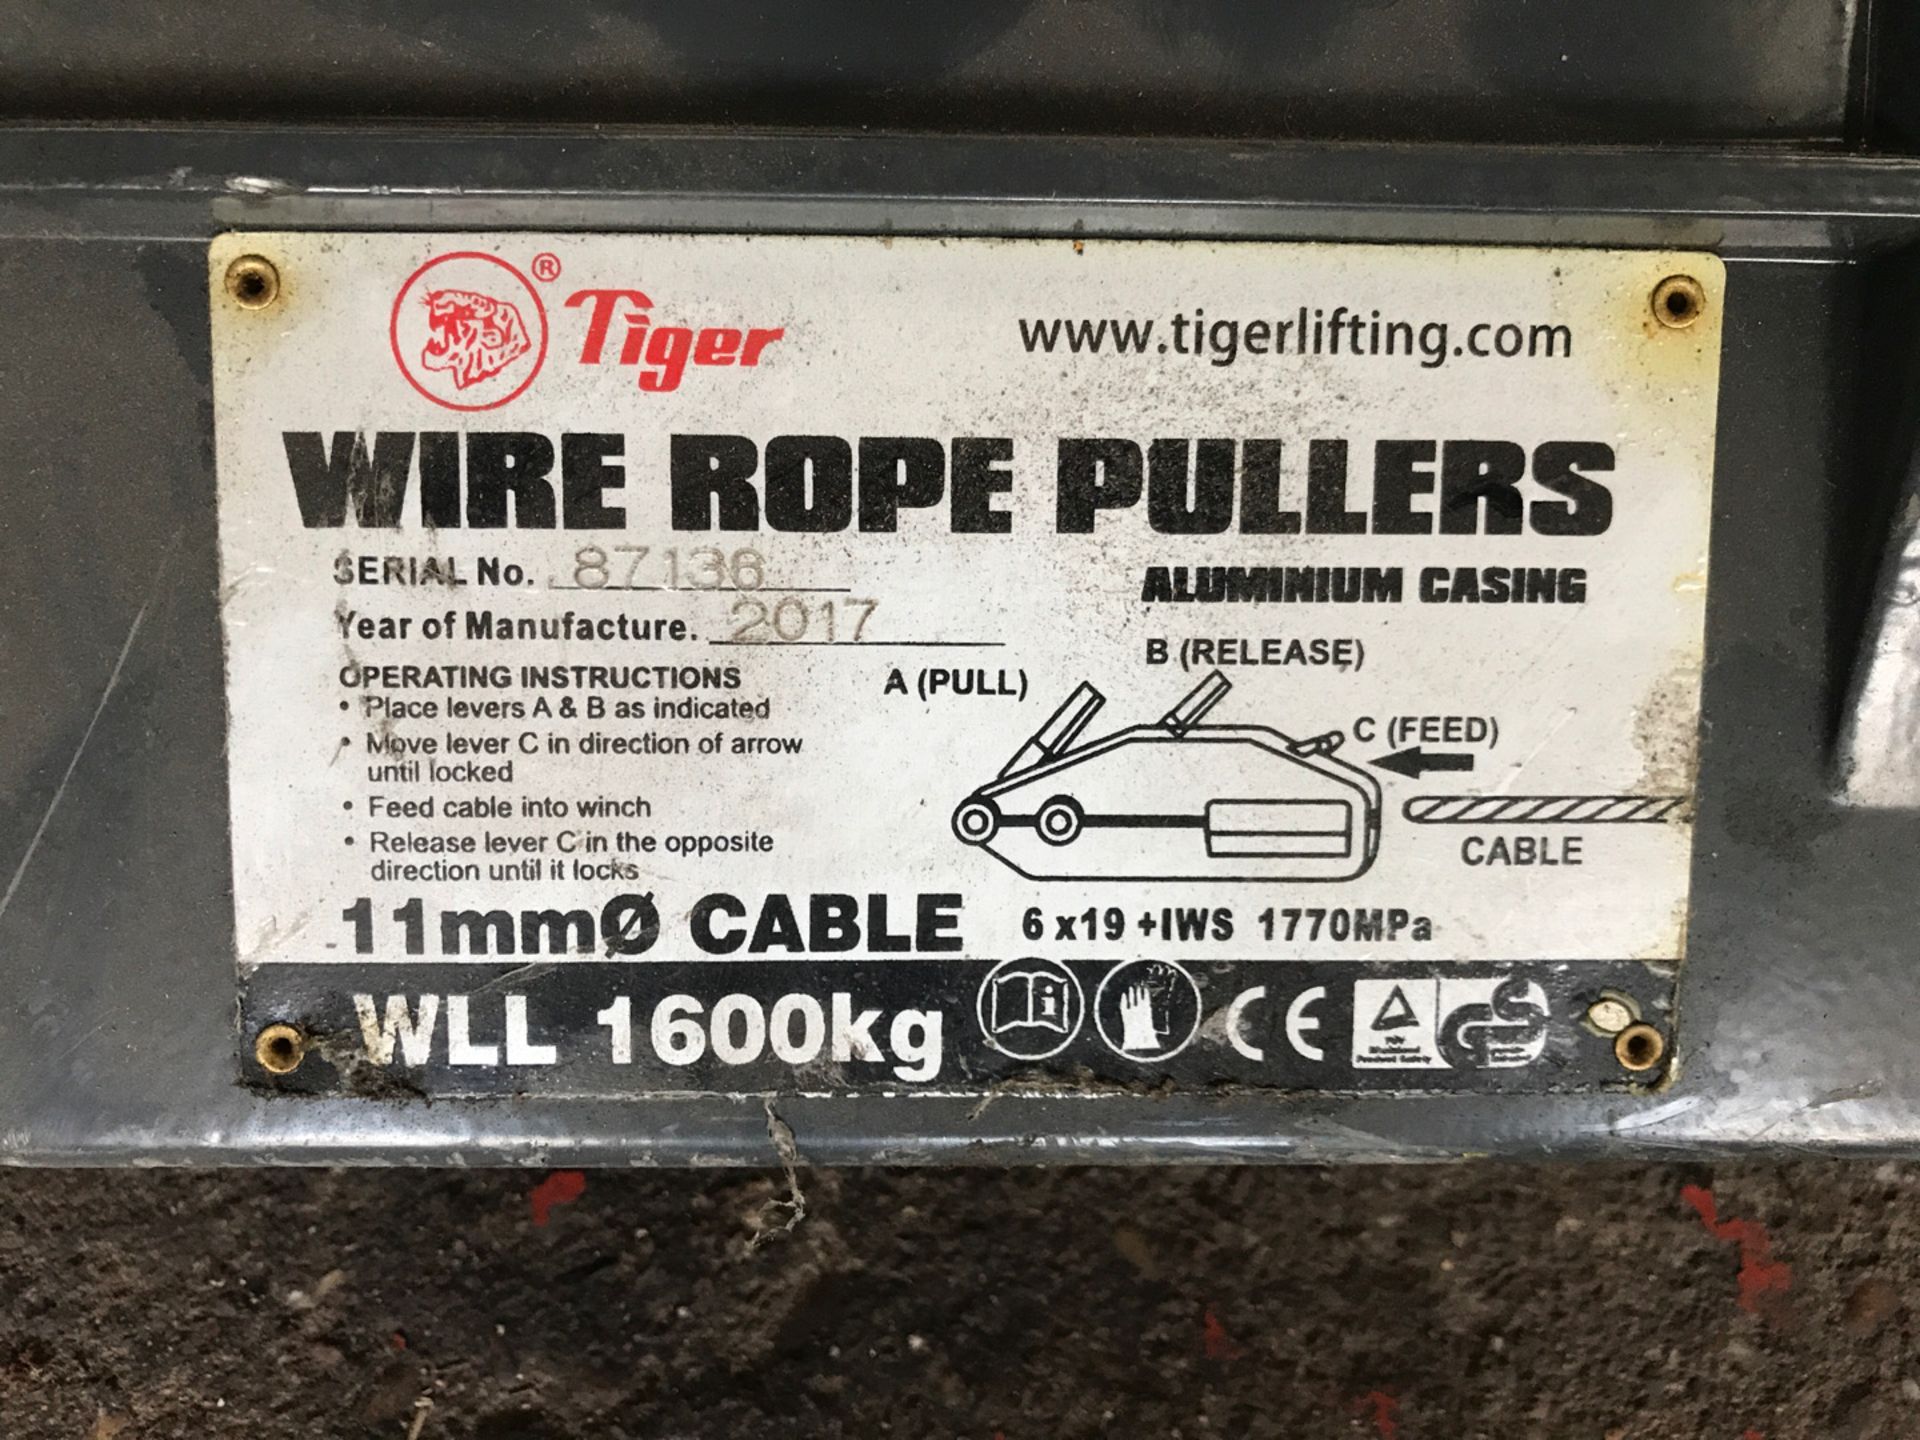 Tiger wire rope puller - Image 2 of 4